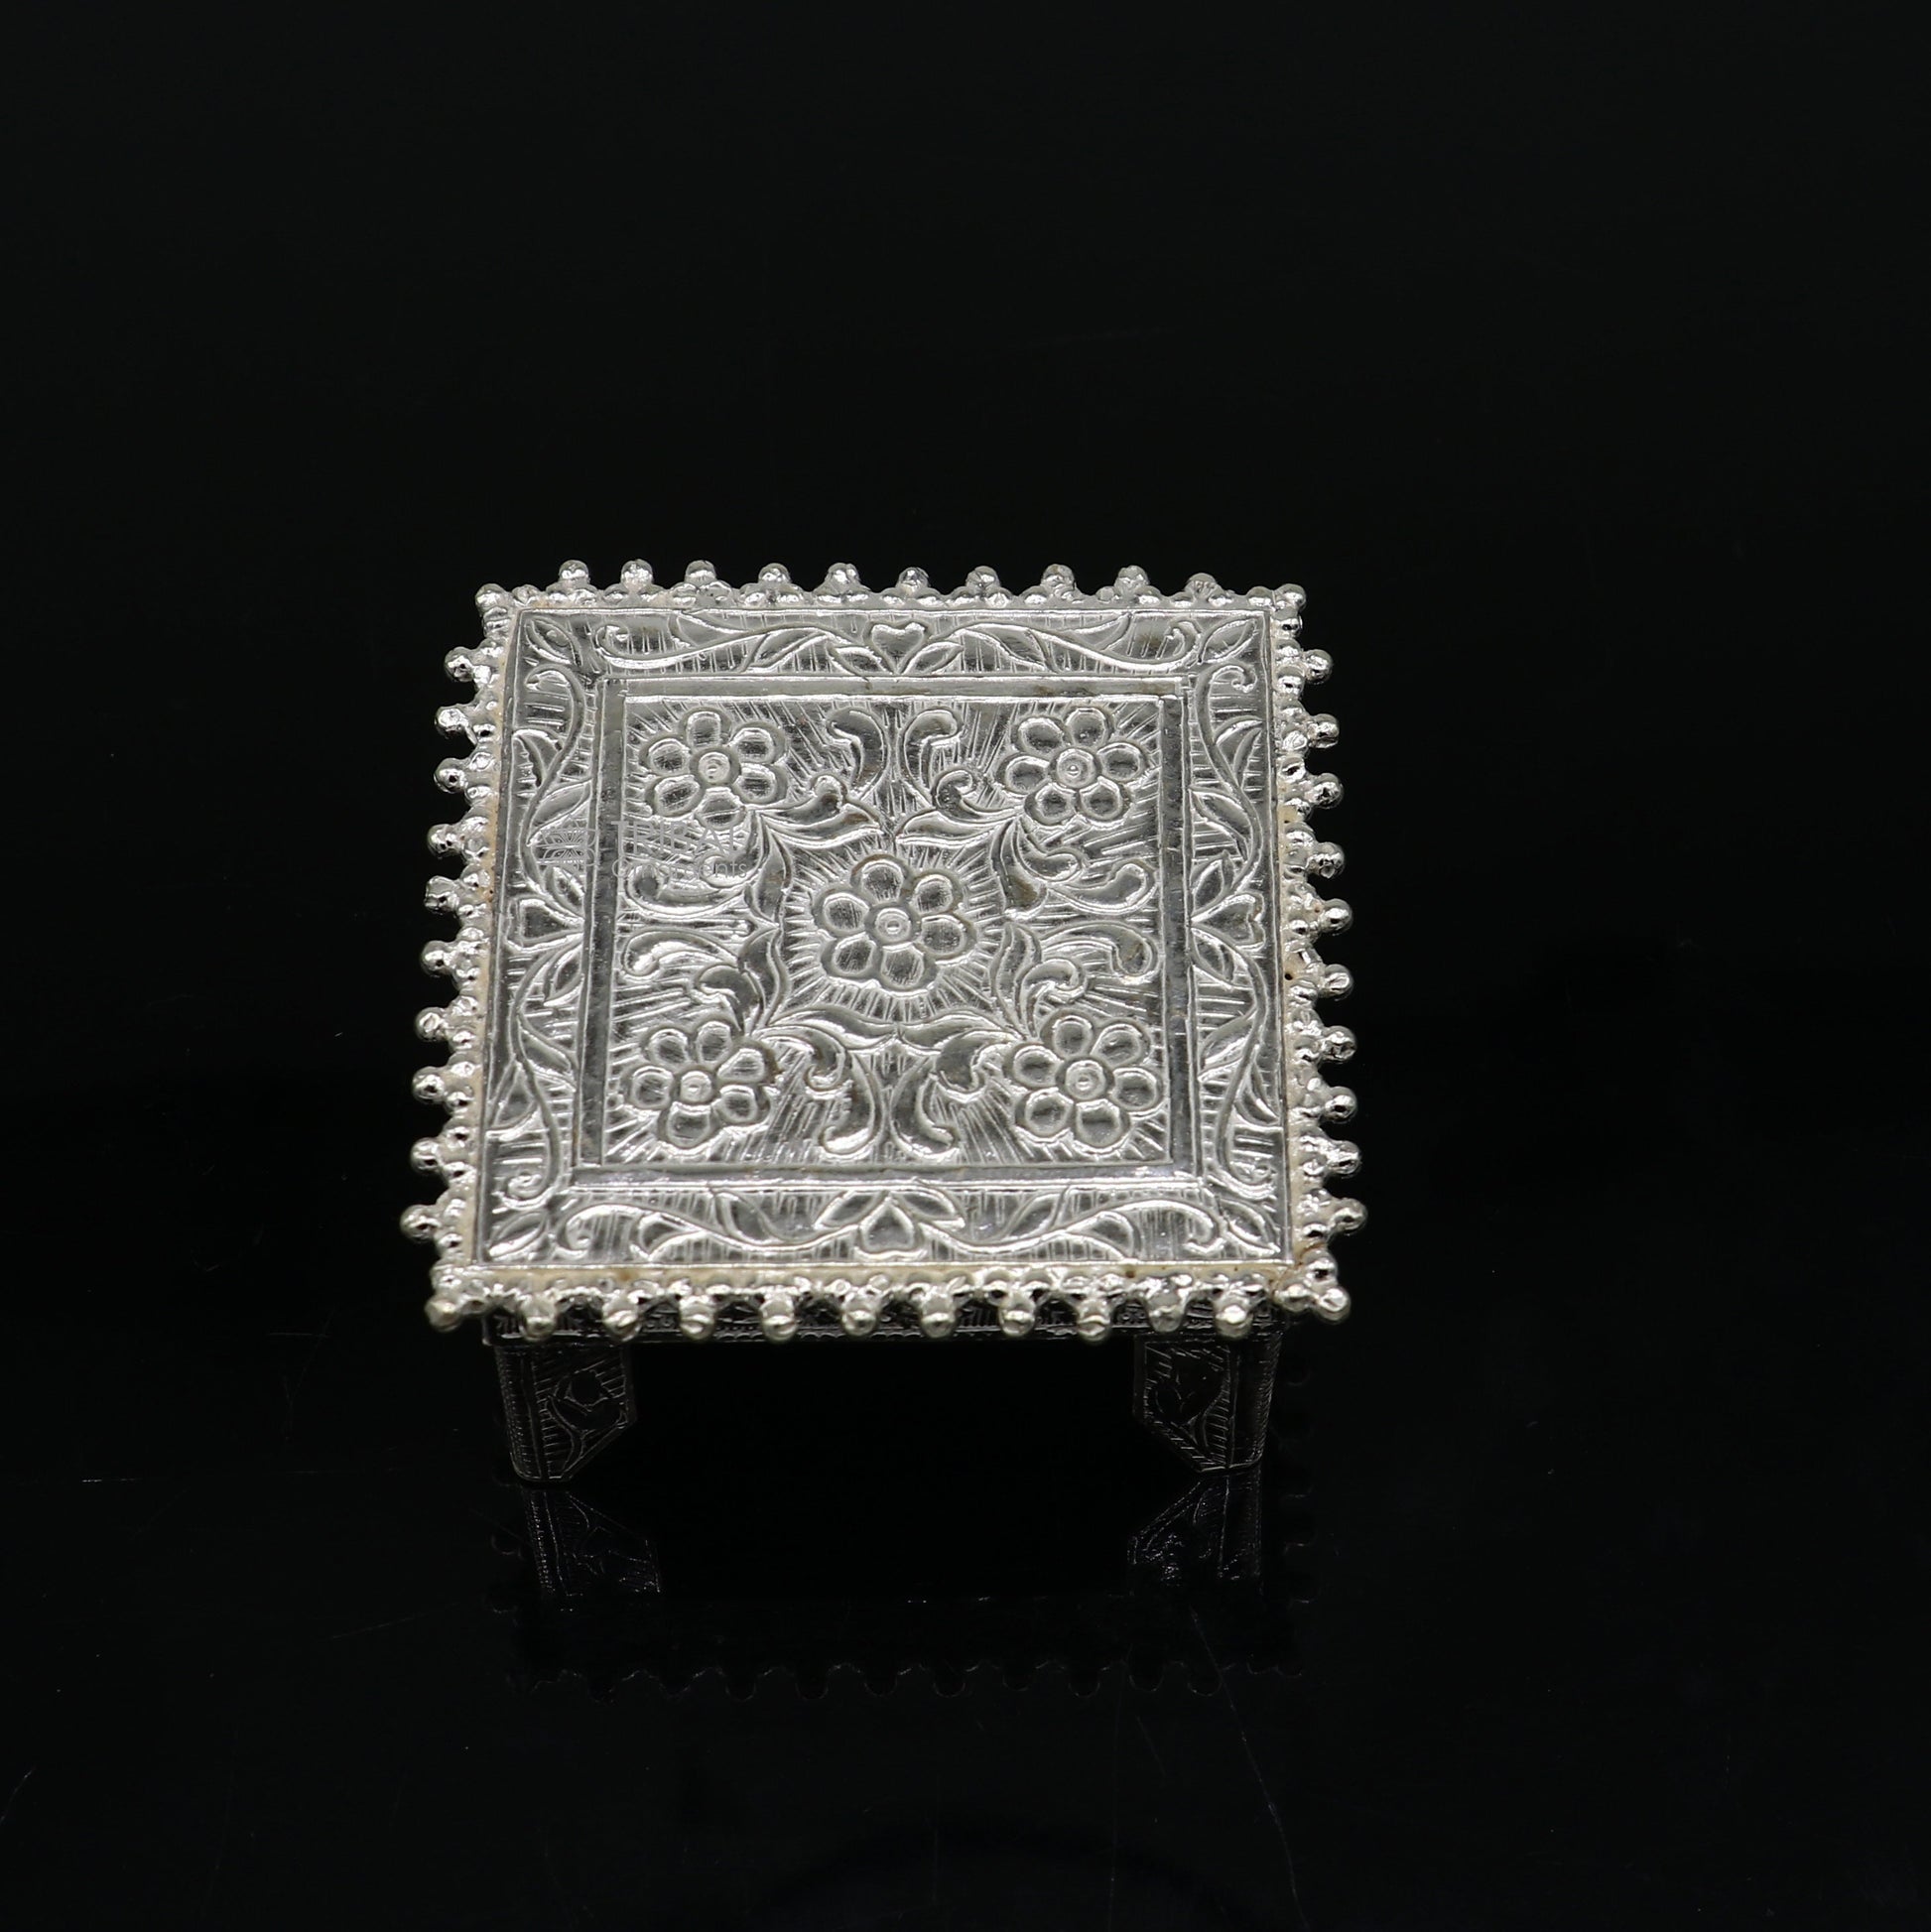 2" Vintage design Sterling silver handmade customize small square shape table/bazot/chouki, excellent home puja utensils temple art su1198 - TRIBAL ORNAMENTS